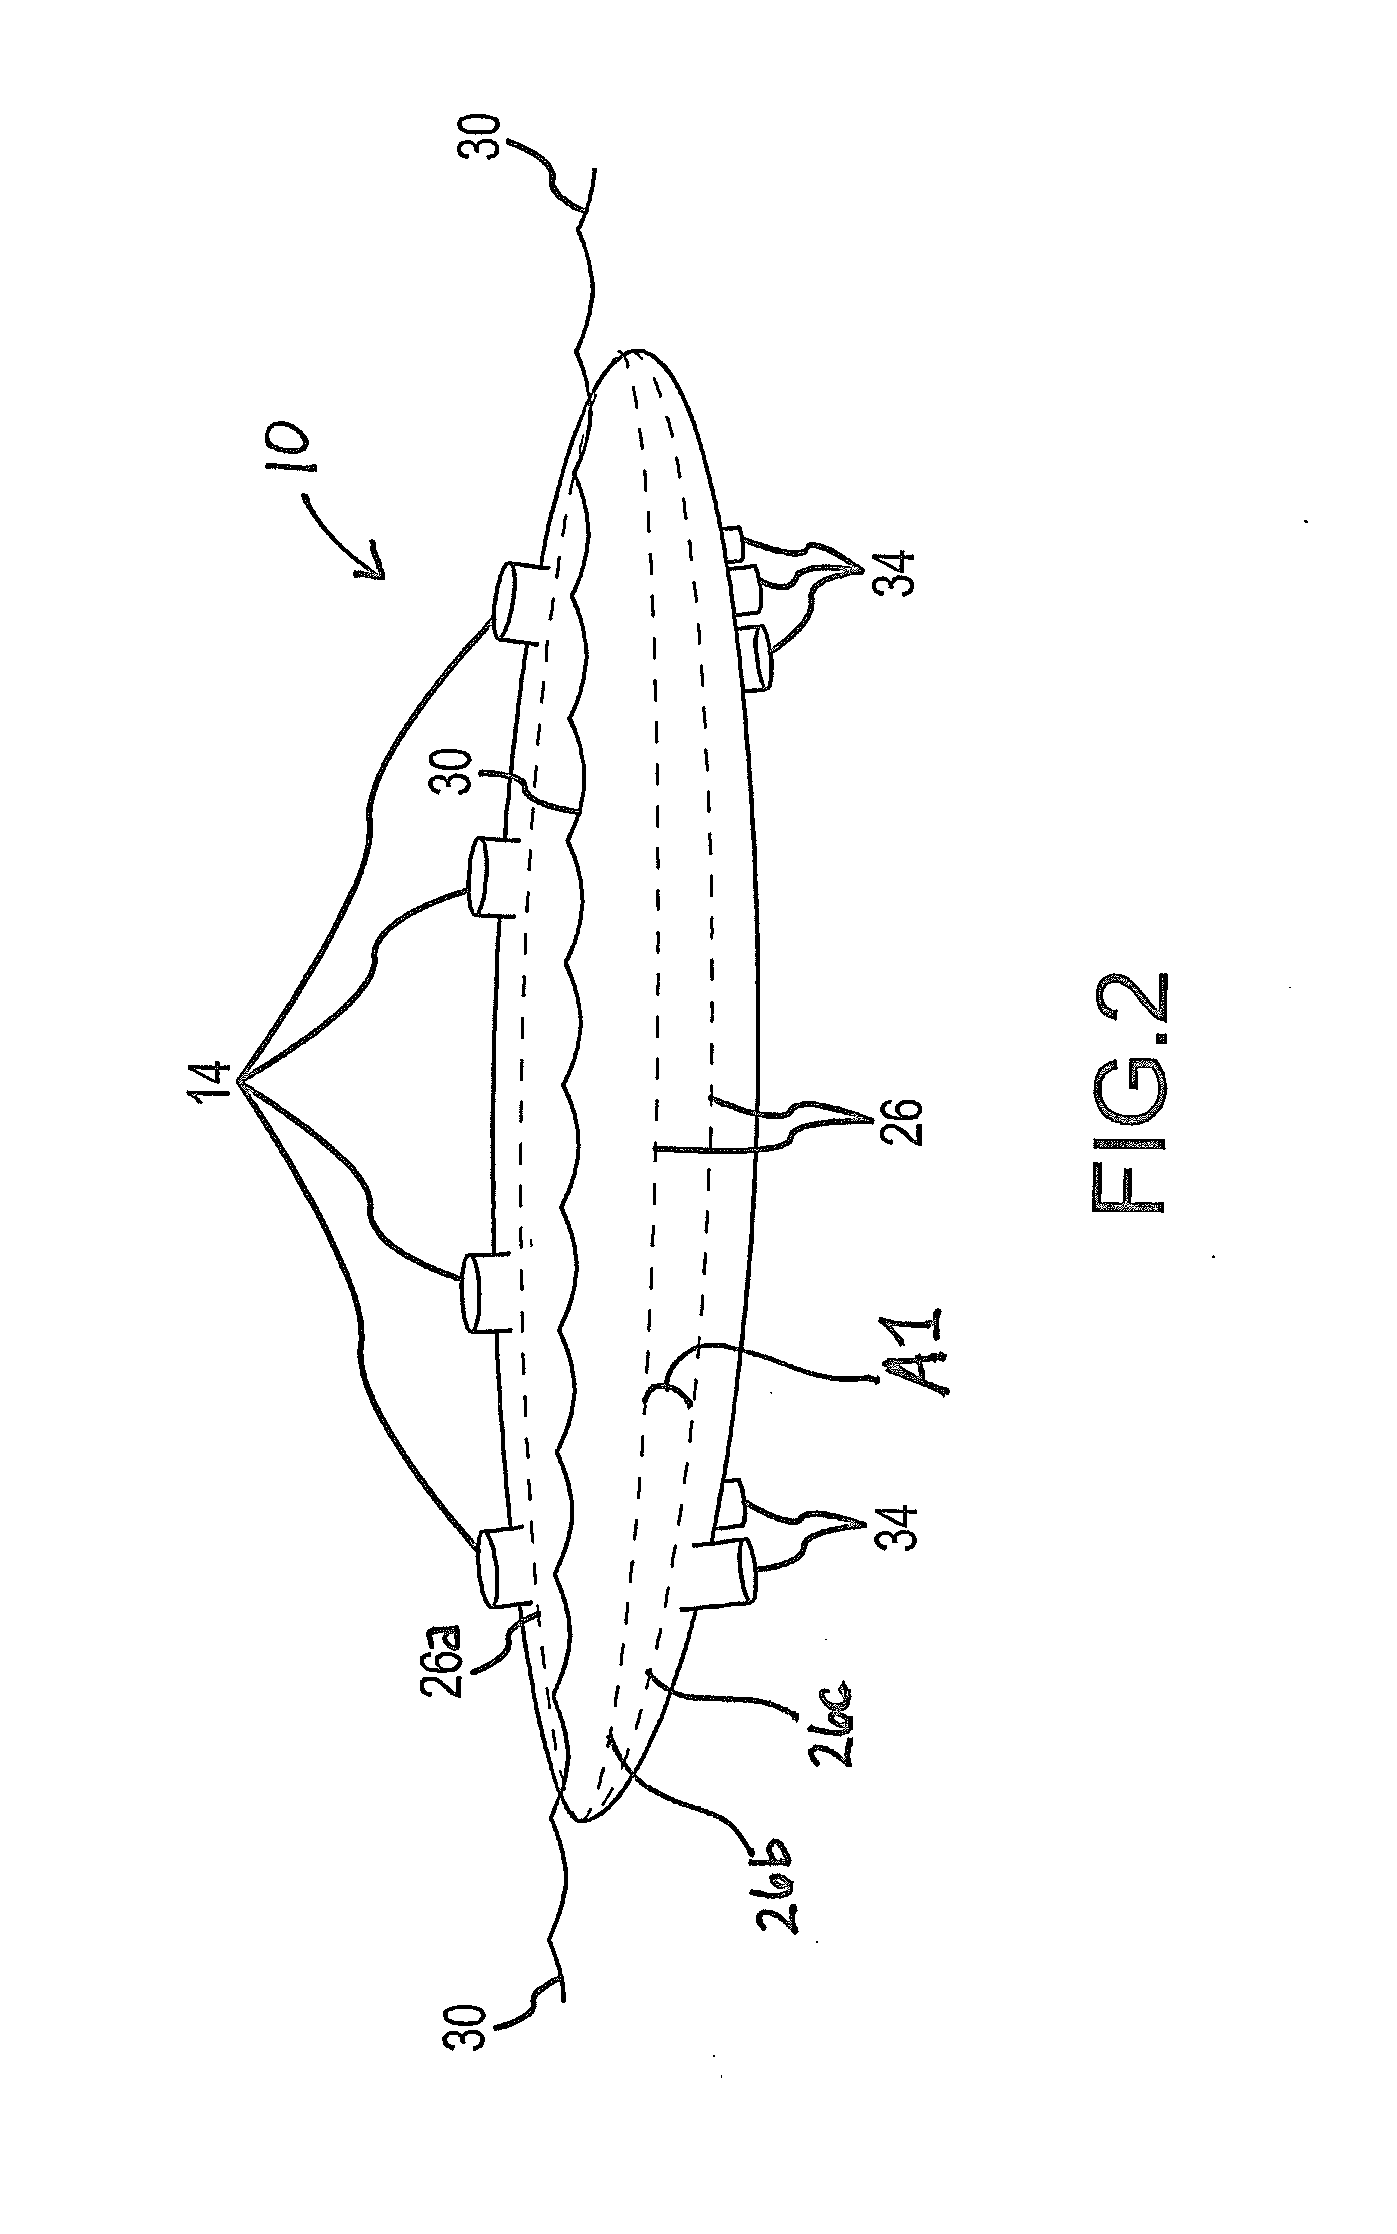 Method and System for a Towed Vessel Suitable for Transporting Liquids